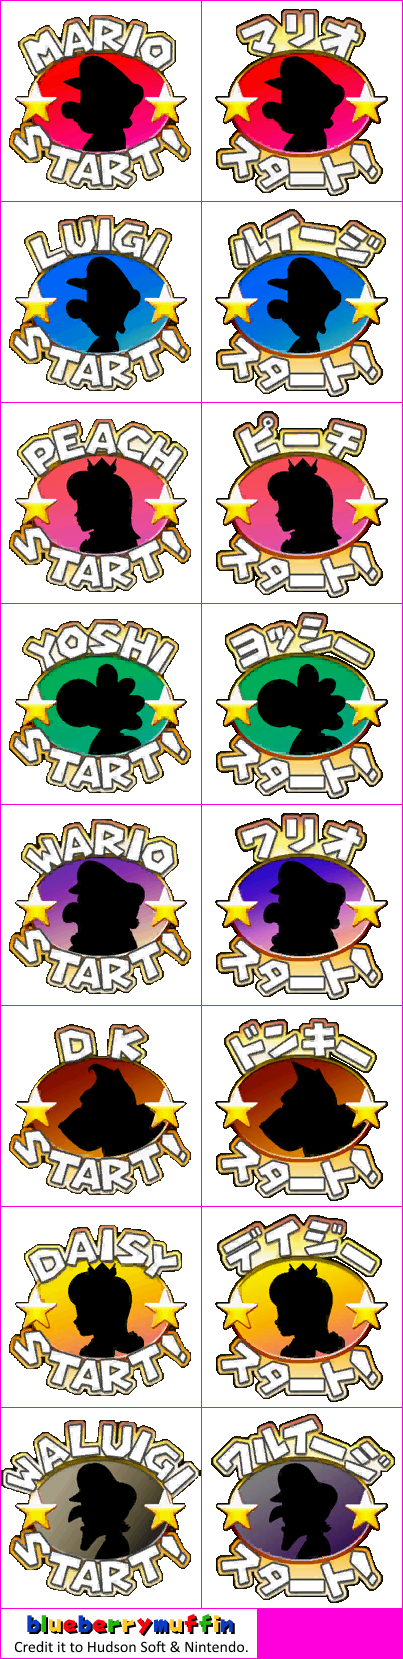 Mario Party 4 - Character Start Screens